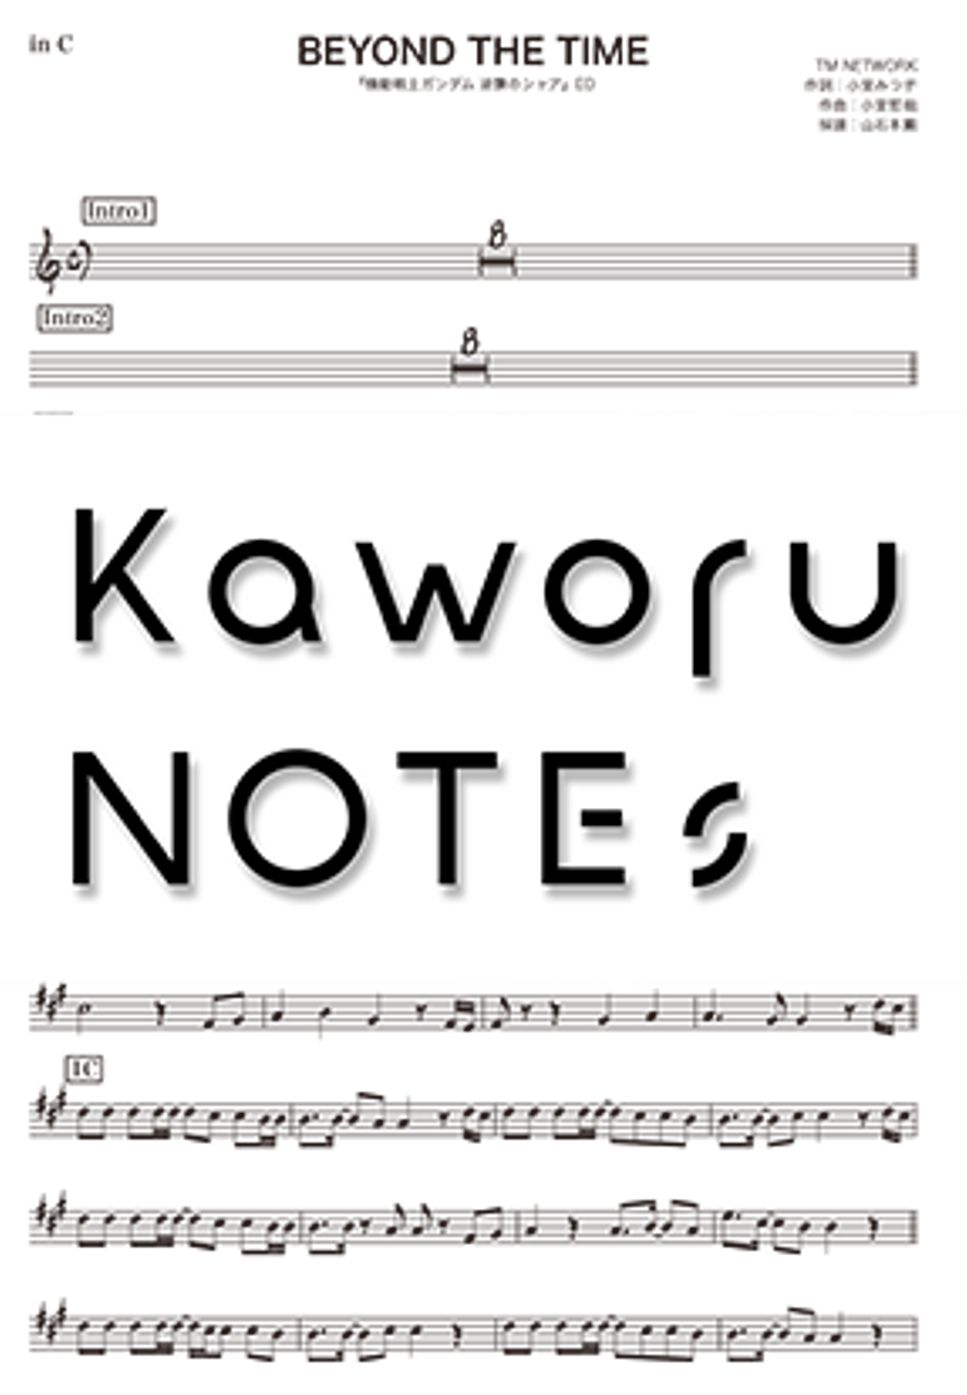 TM NETWORK - BEYOND THE TIME（in B♭/Mobile Suit Gundam Char's Counterattack） by Kaworu NOTEs